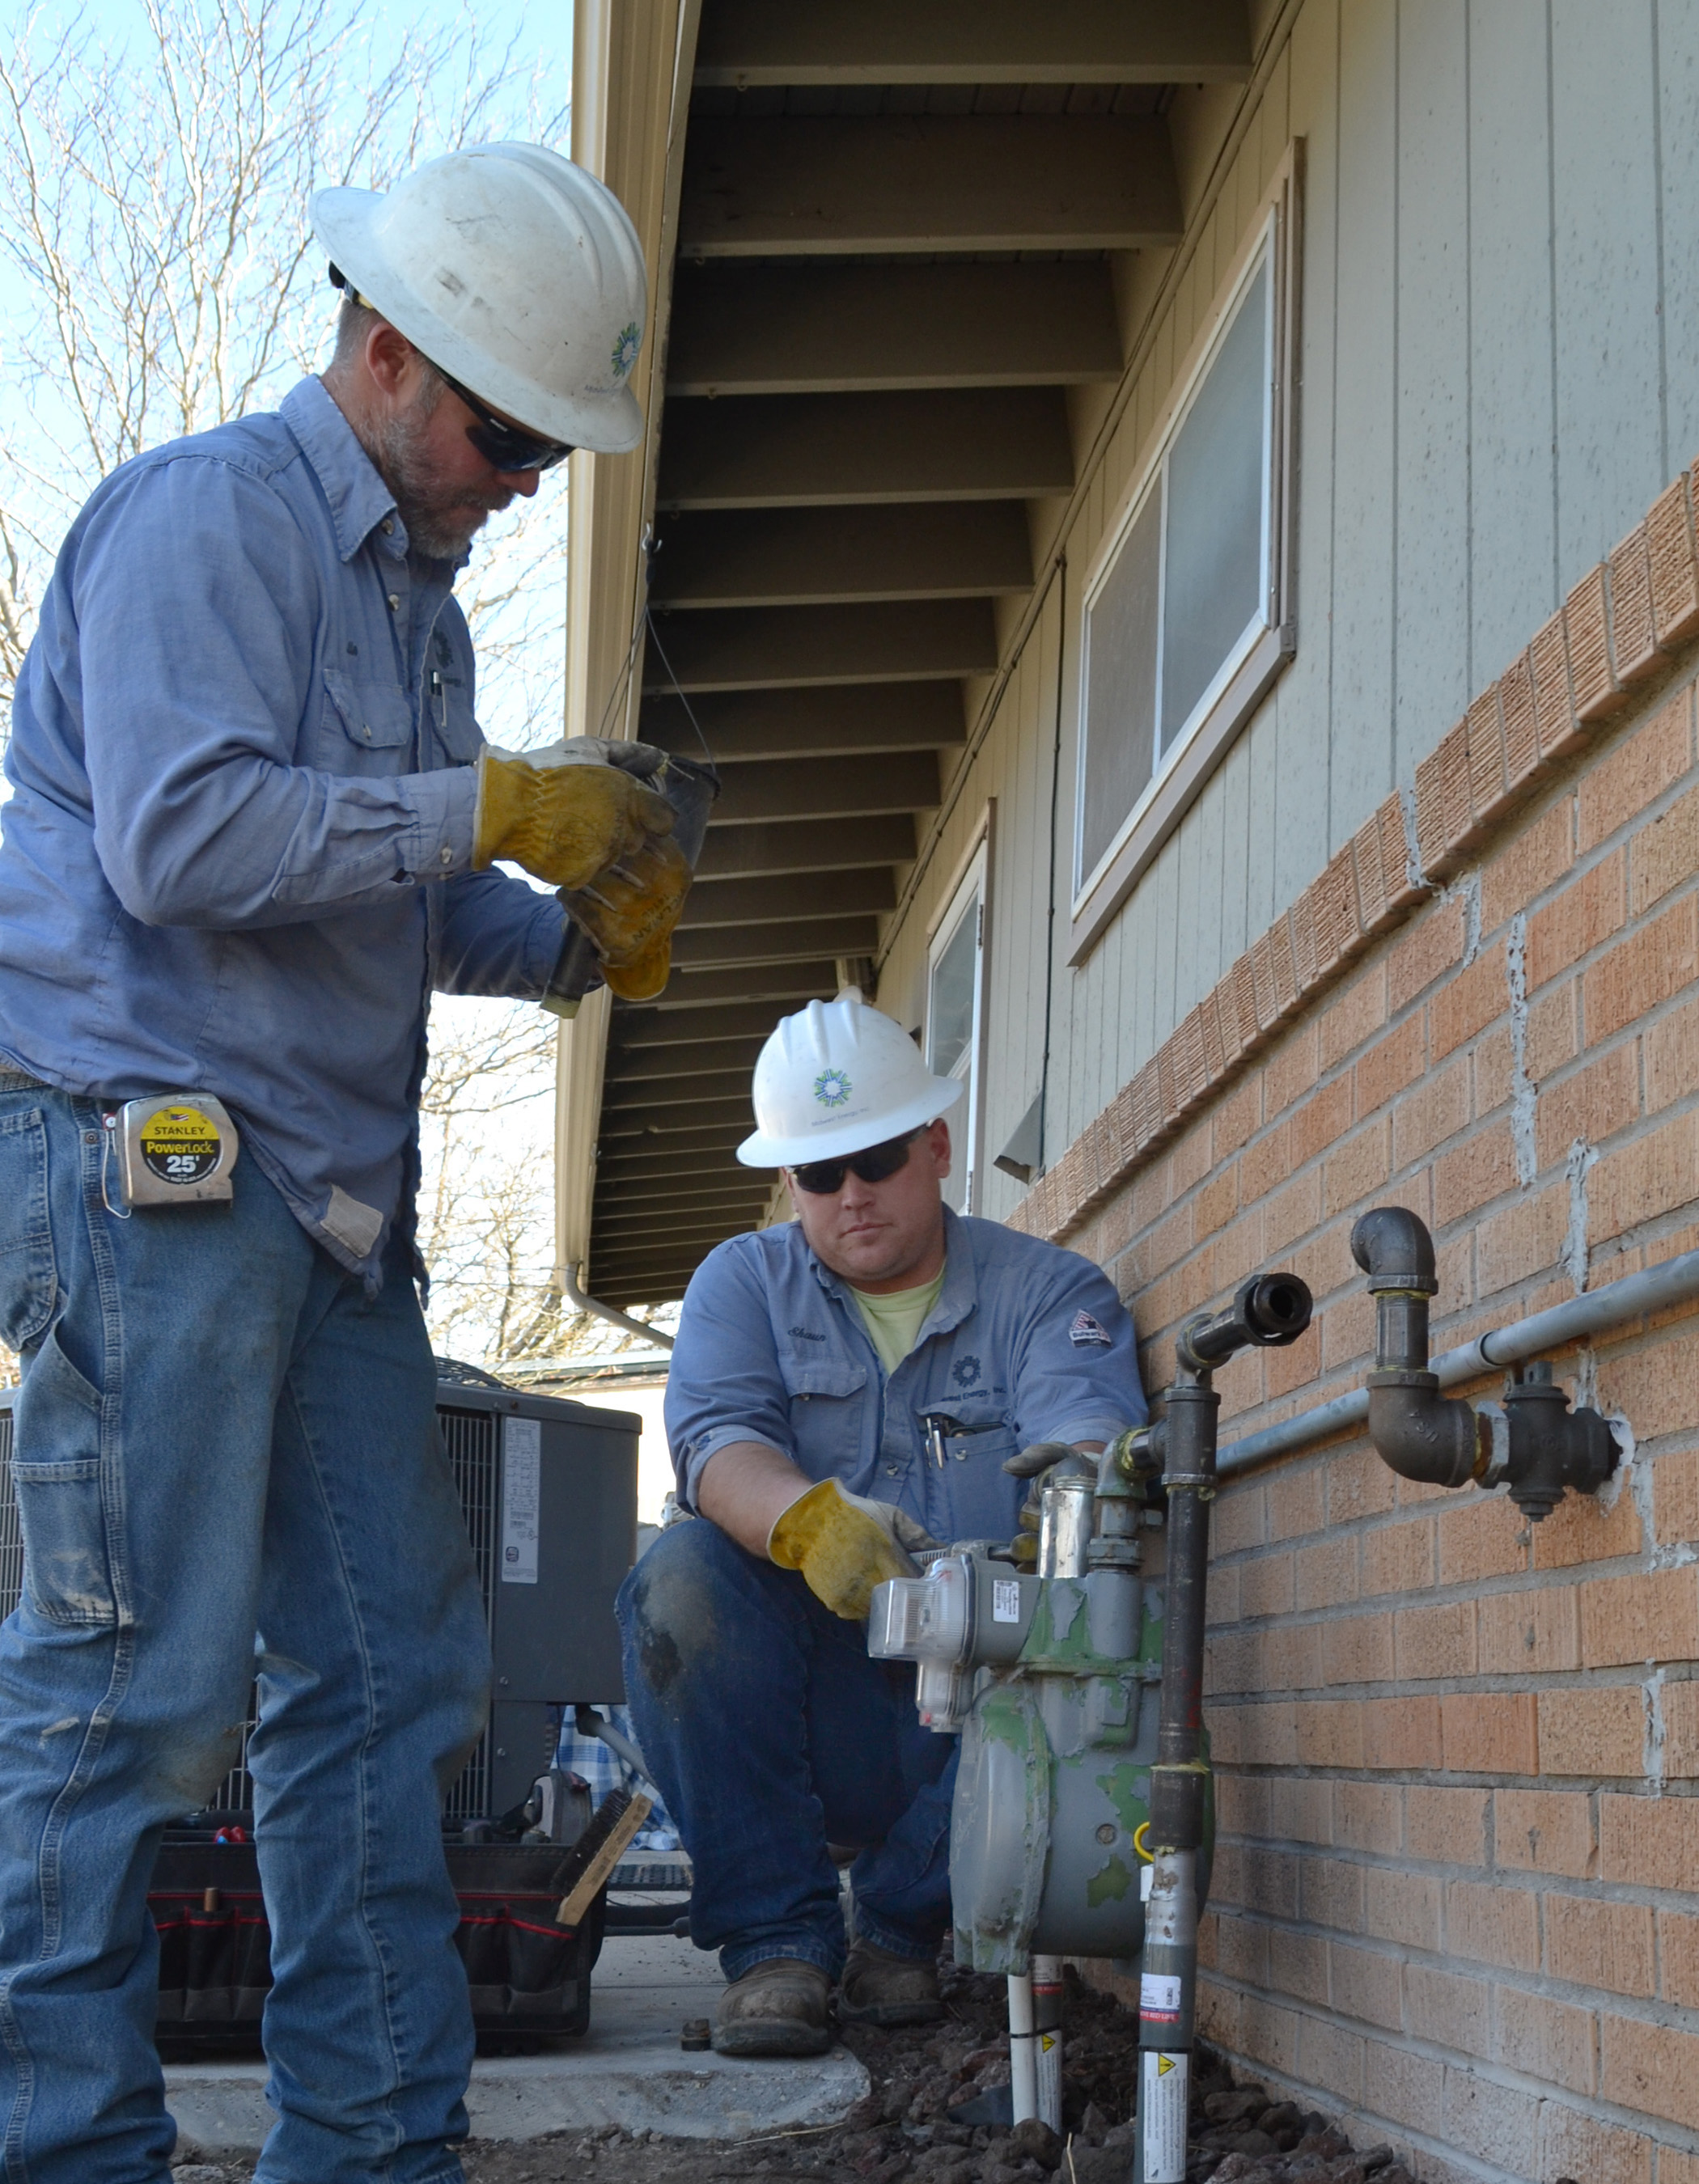 Two natural gas workers in blue shirts and white helmets attach a gas meter to the exterior of a brick home.